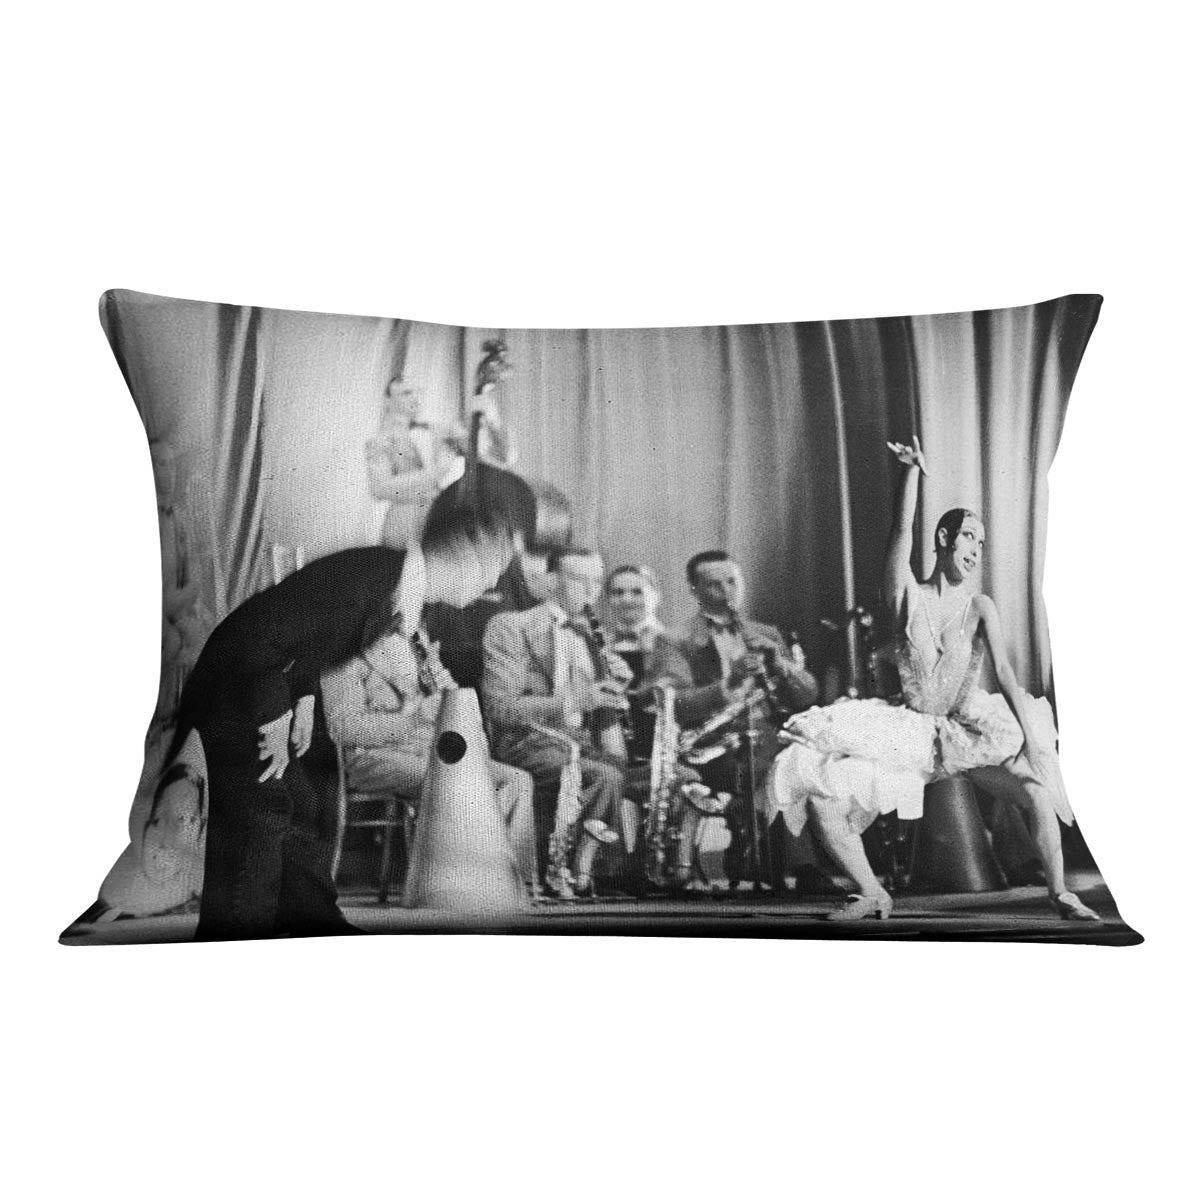 Actress Josephine Baker at the Prince Edward theatre Cushion